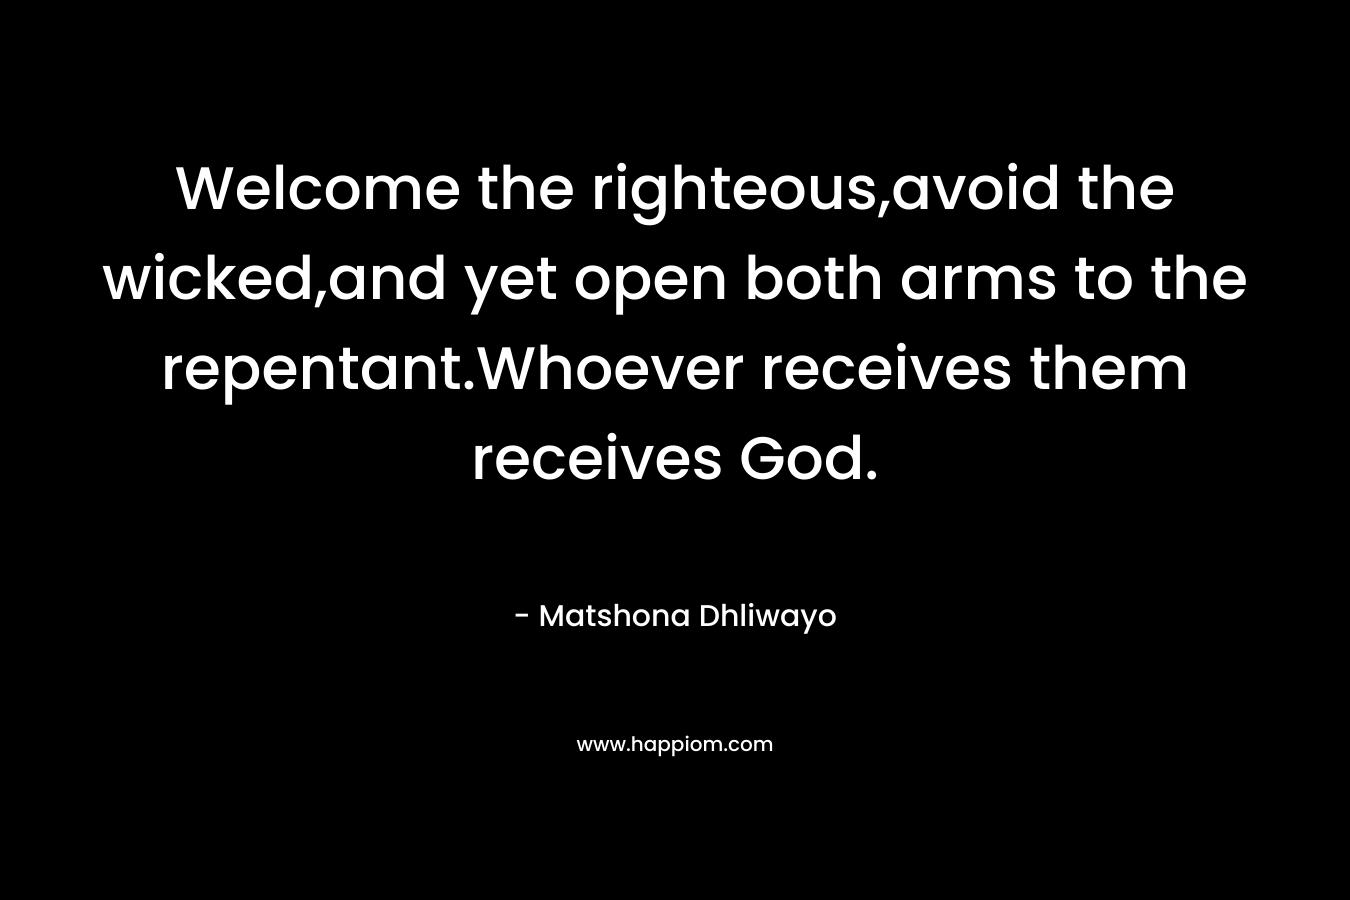 Welcome the righteous,avoid the wicked,and yet open both arms to the repentant.Whoever receives them receives God. – Matshona Dhliwayo